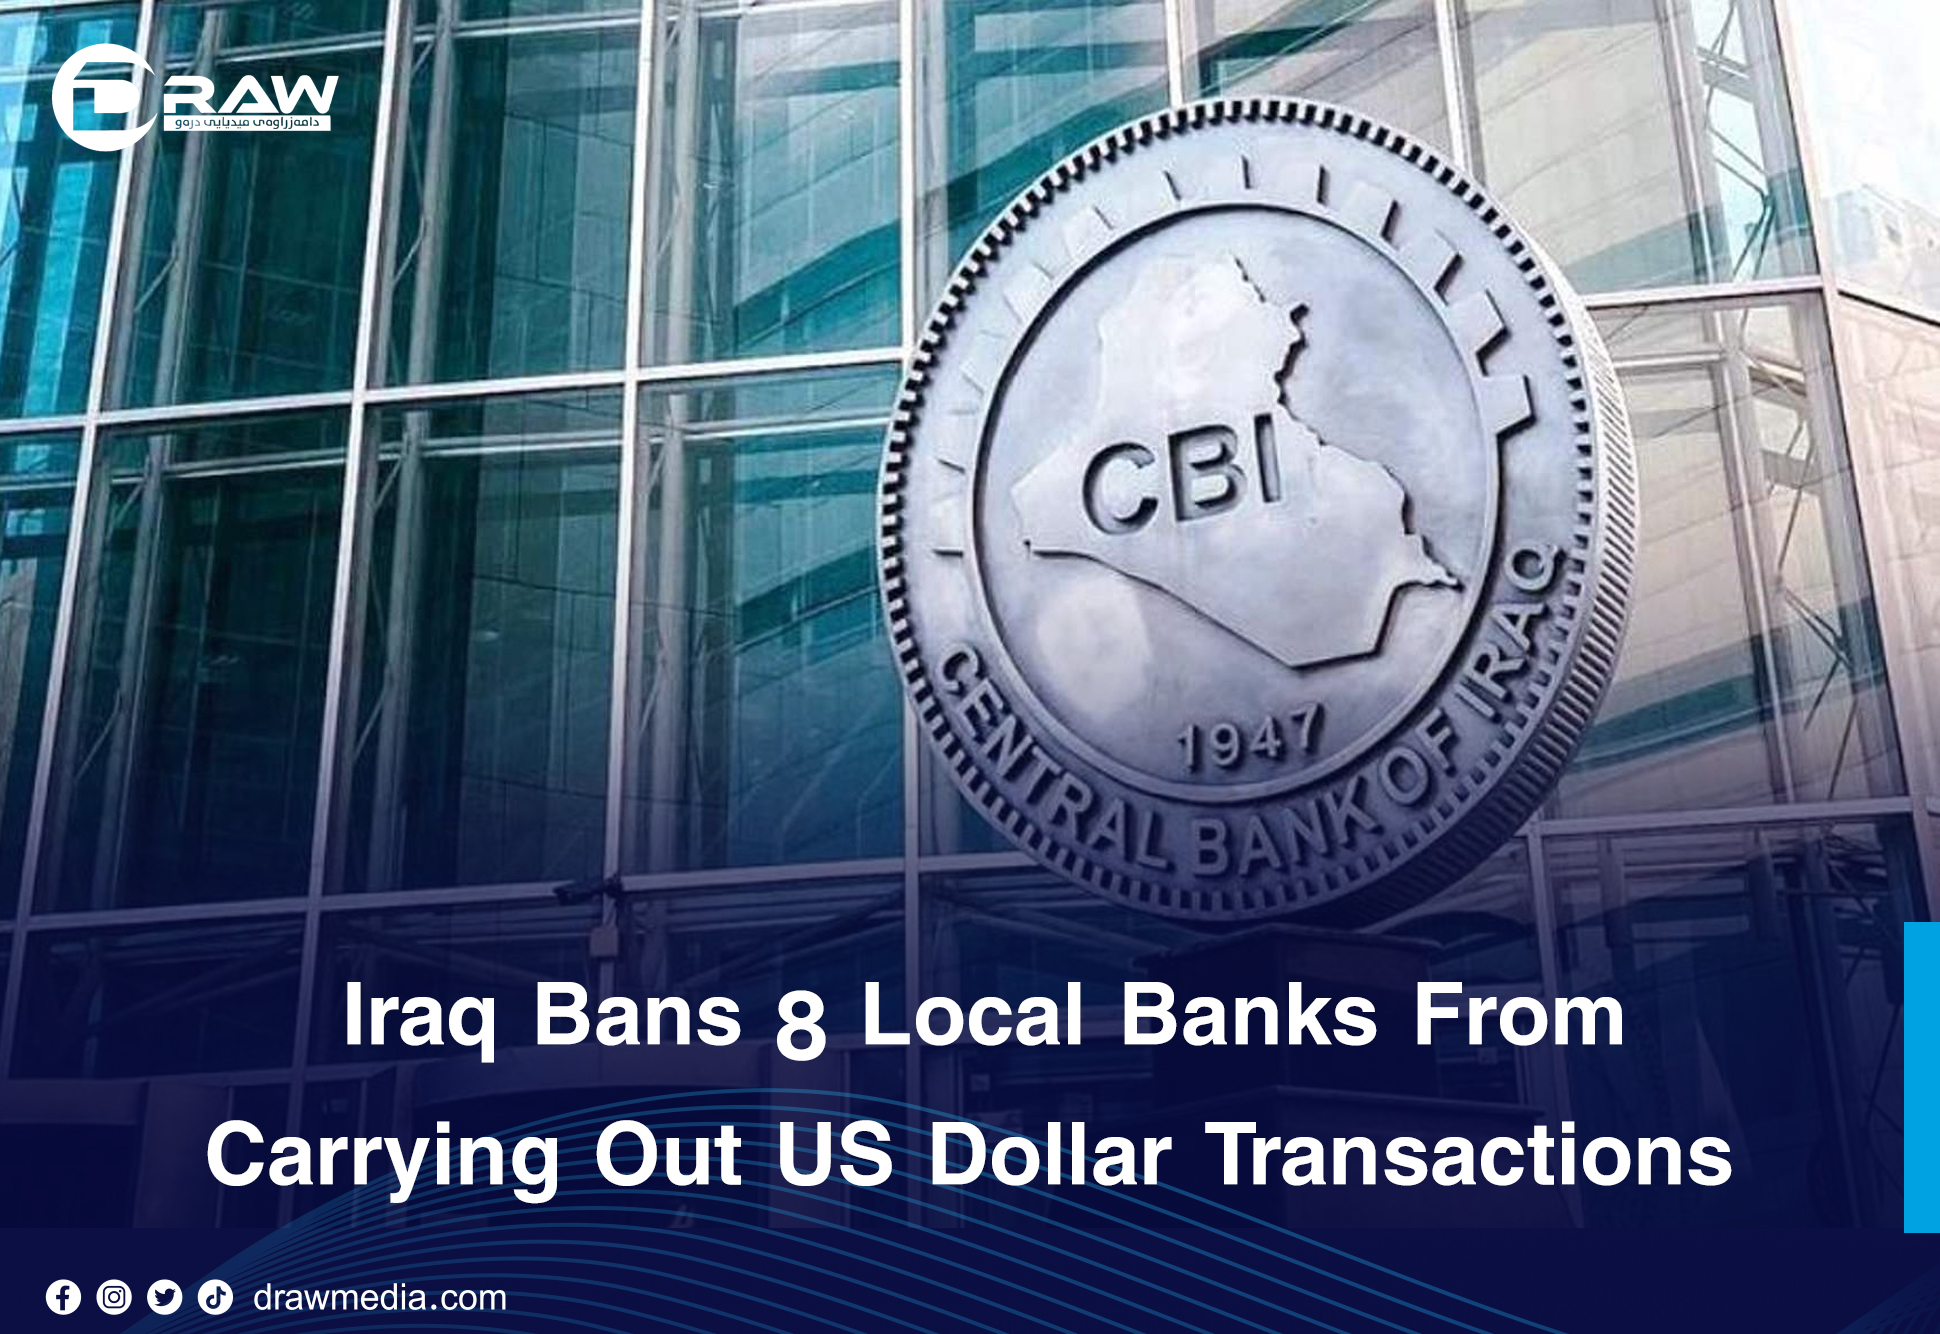 DrawMedia.net / Iraq Bans 8 Local Banks From Carrying Out US Dollar Transactions